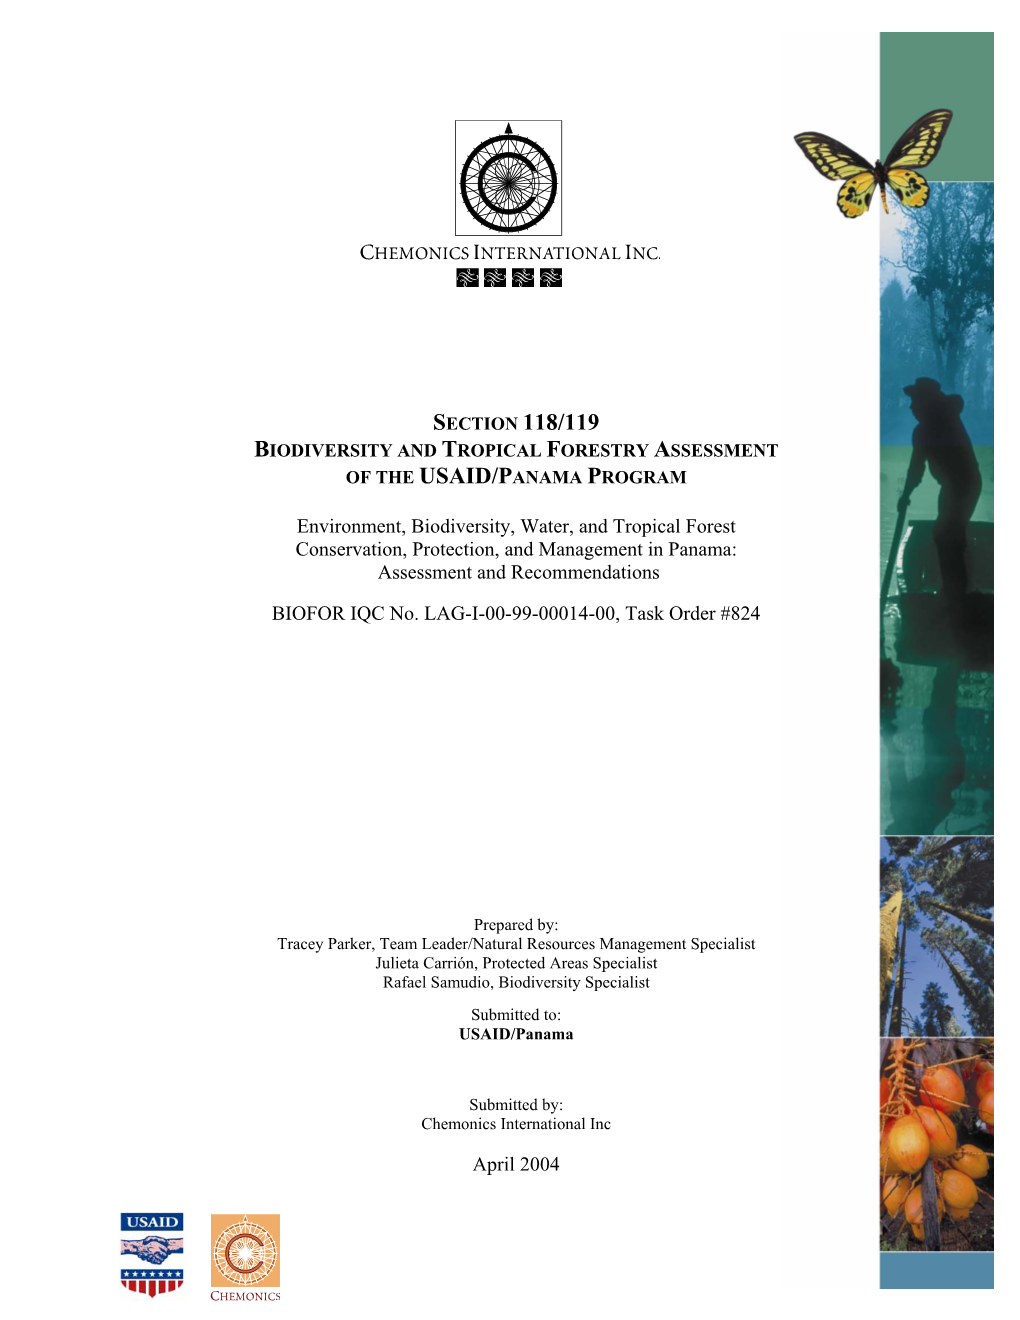 Environment, Biodiversity, Water, and Tropical Forest Conservation, Protection, and Management in Panama: Assessment and Recommendations